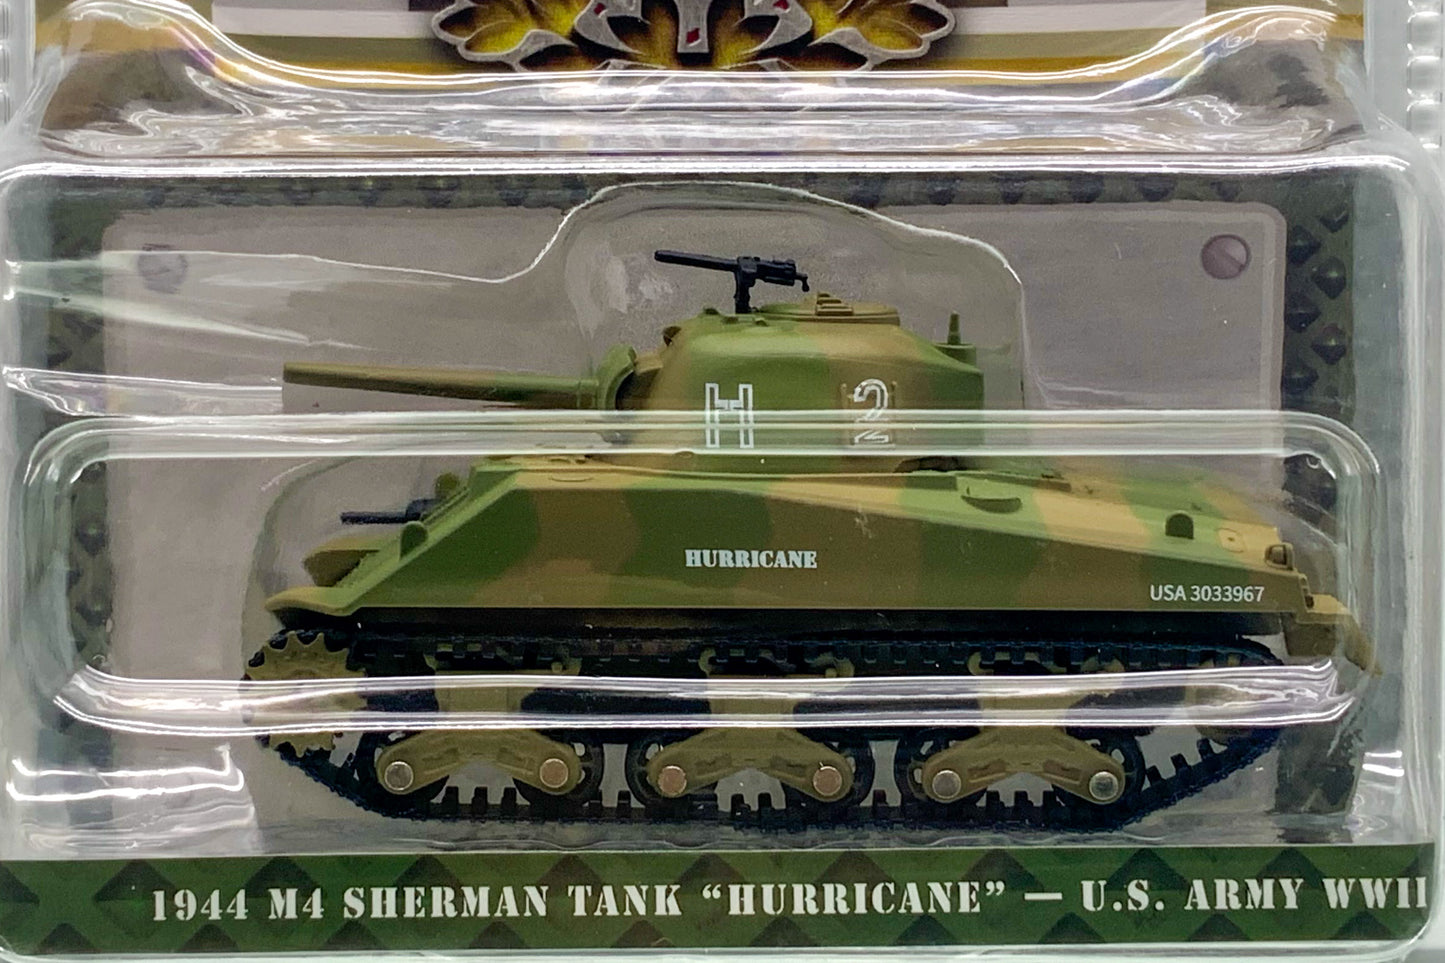 Buy at Tatoyshop.com   List 2023 Greenlight Battalion 64 Series    U.S. Army Ambulance - 1939 Chevrolet Panel Truck  1944 M4 Sherman Tank "Hurricane" - U.S. Army World War II - 66th Armor Regiment, 2nd U.S. Armoured Division, Normandy  545th Military Police Company - Camp Drake, Japan Training Camp - 1949 Willys Jeep MB  U.S. Air Force Air Police - 1971 Jeep DJ-5  1984 Chevrolet M1009 CUCV in Camouflage with Mounted Machine Guns  U.S. Army - Military-Spec Camouflage - 2022 Jeep Gladiator